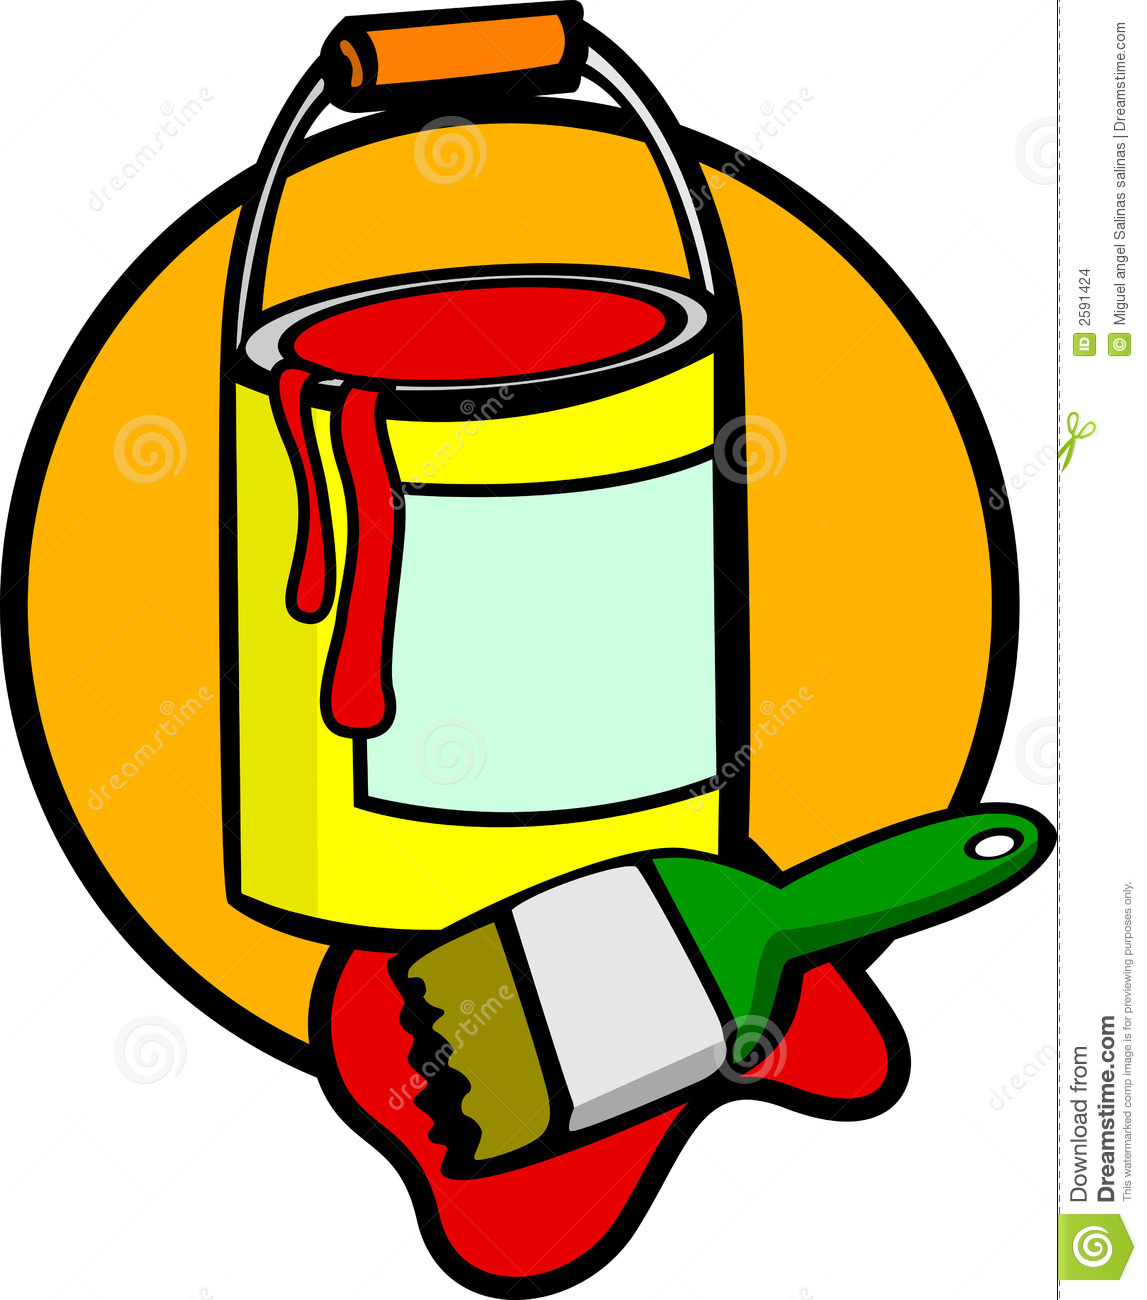 Paint Bucket Spilled Vector Images (over 310)